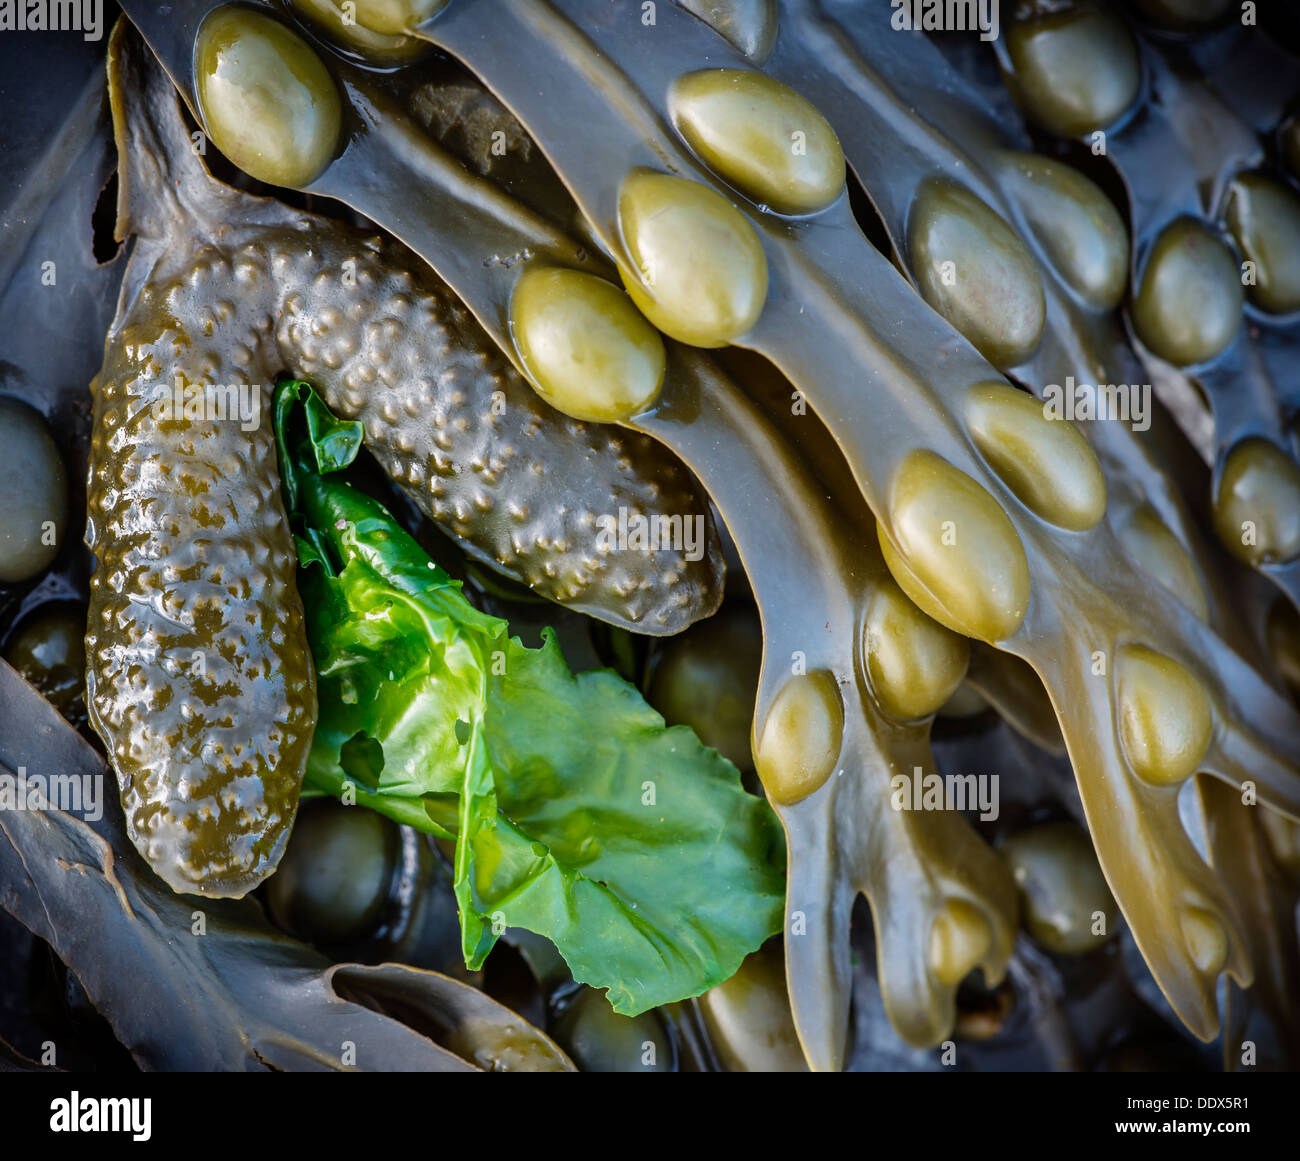 Bladder wrack and sea lettuce, exposed by the out going tide Stock Photo